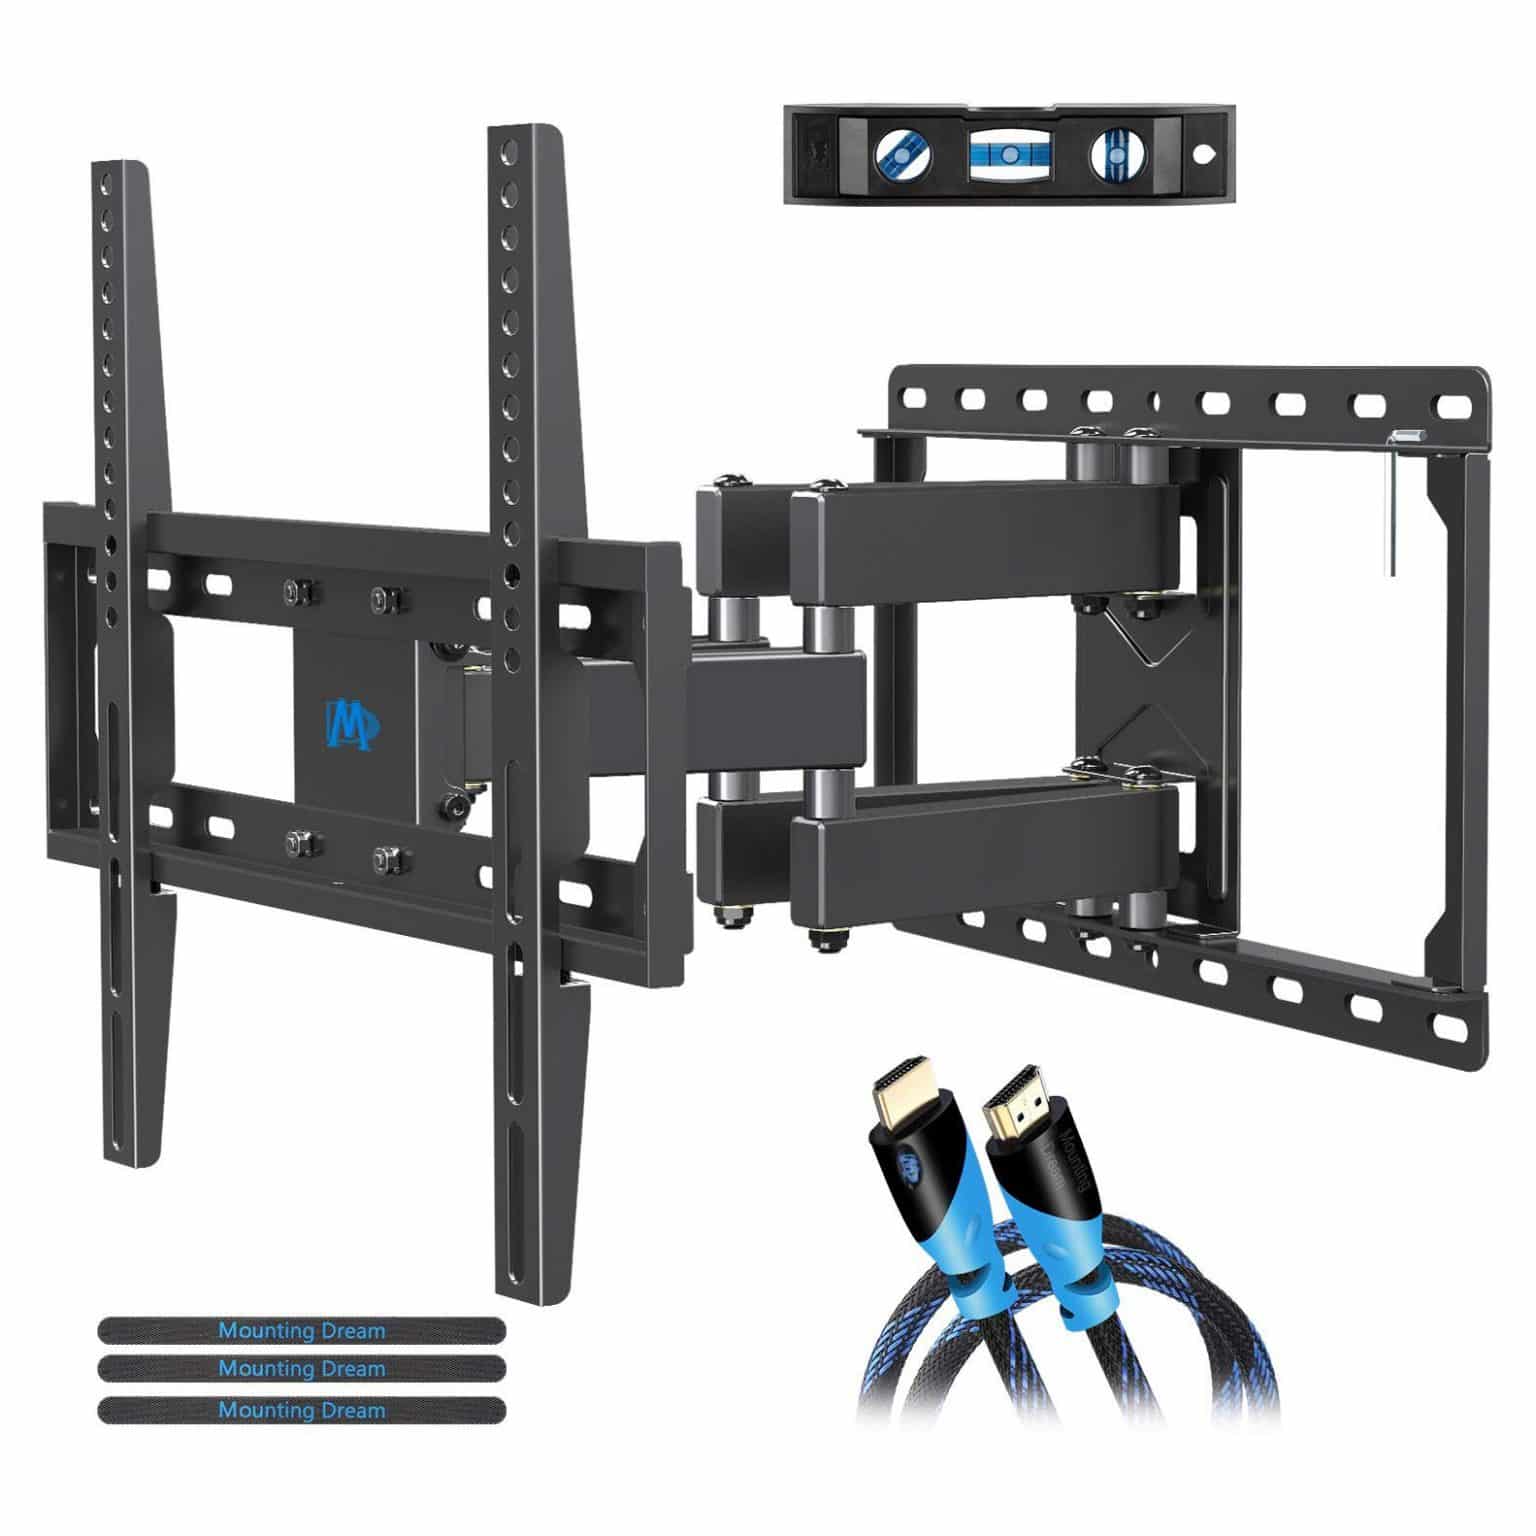 2. Mounting Dream TV Wall Mount 1536x1536 